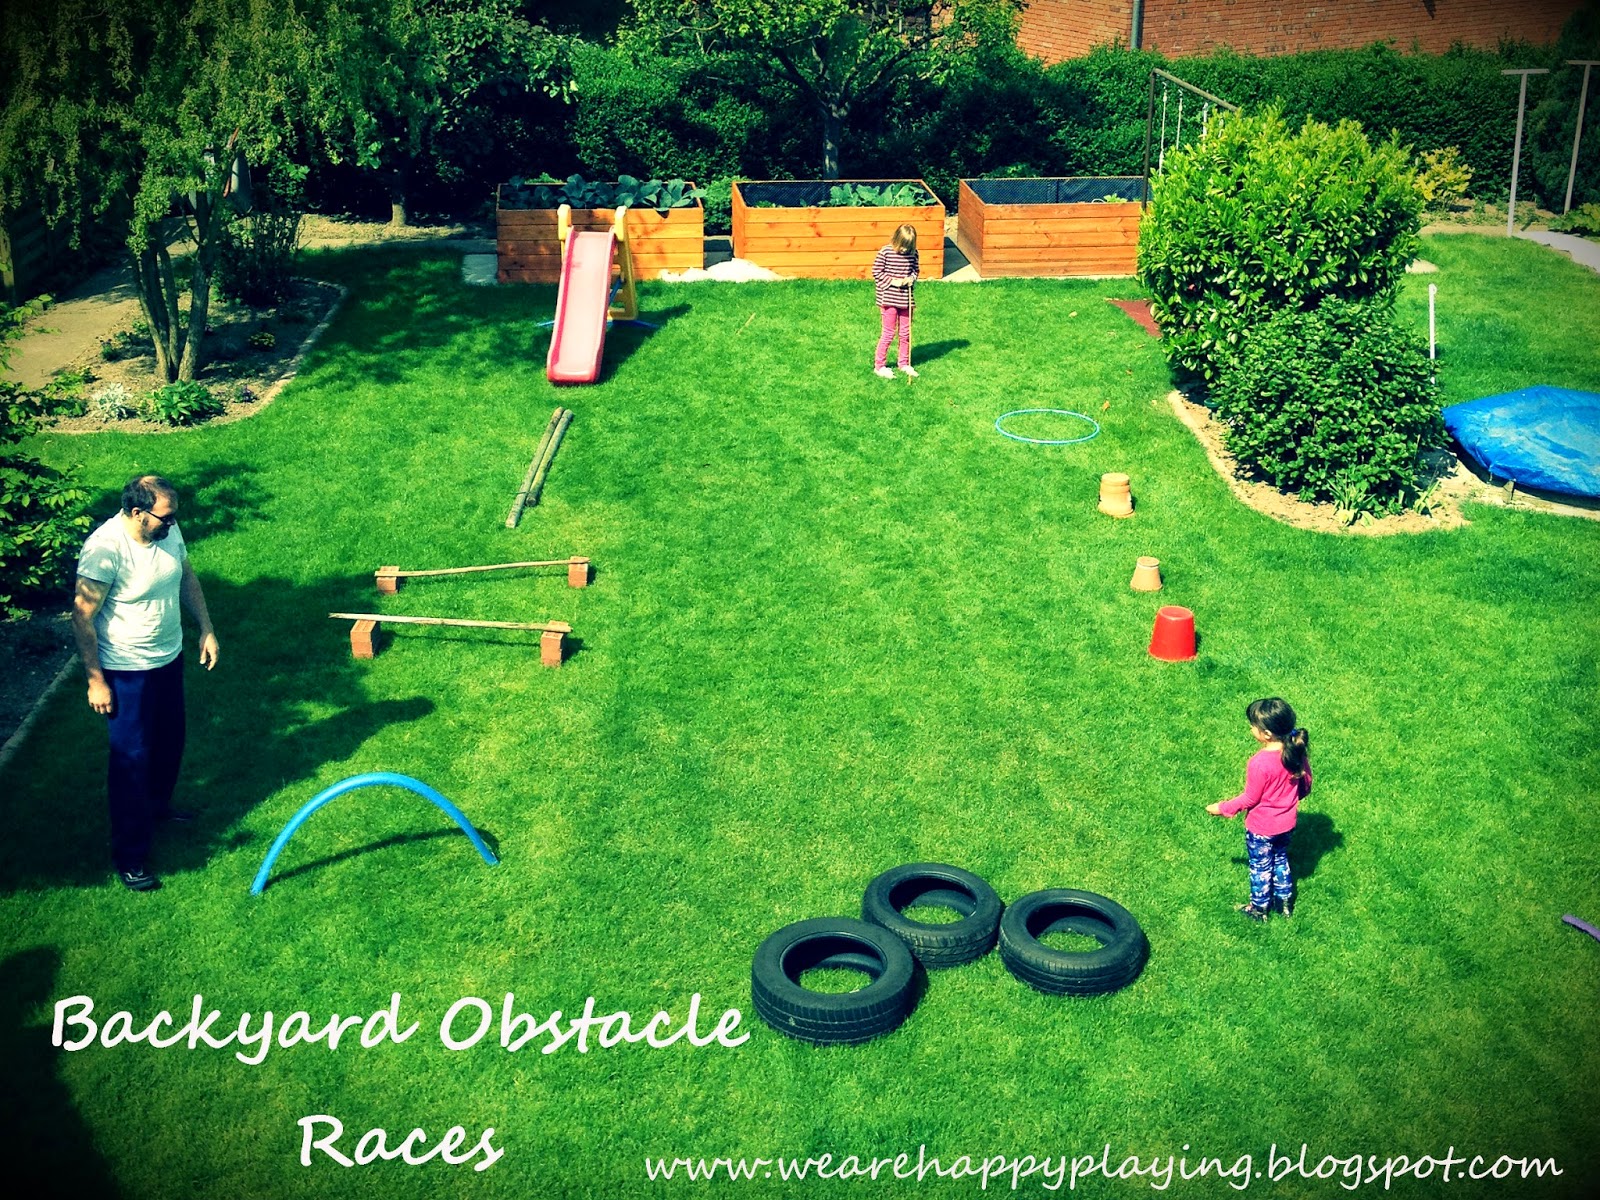 We Are Happy Playing Diy Backyard Obstacle Races Without Spending Money On Equipment